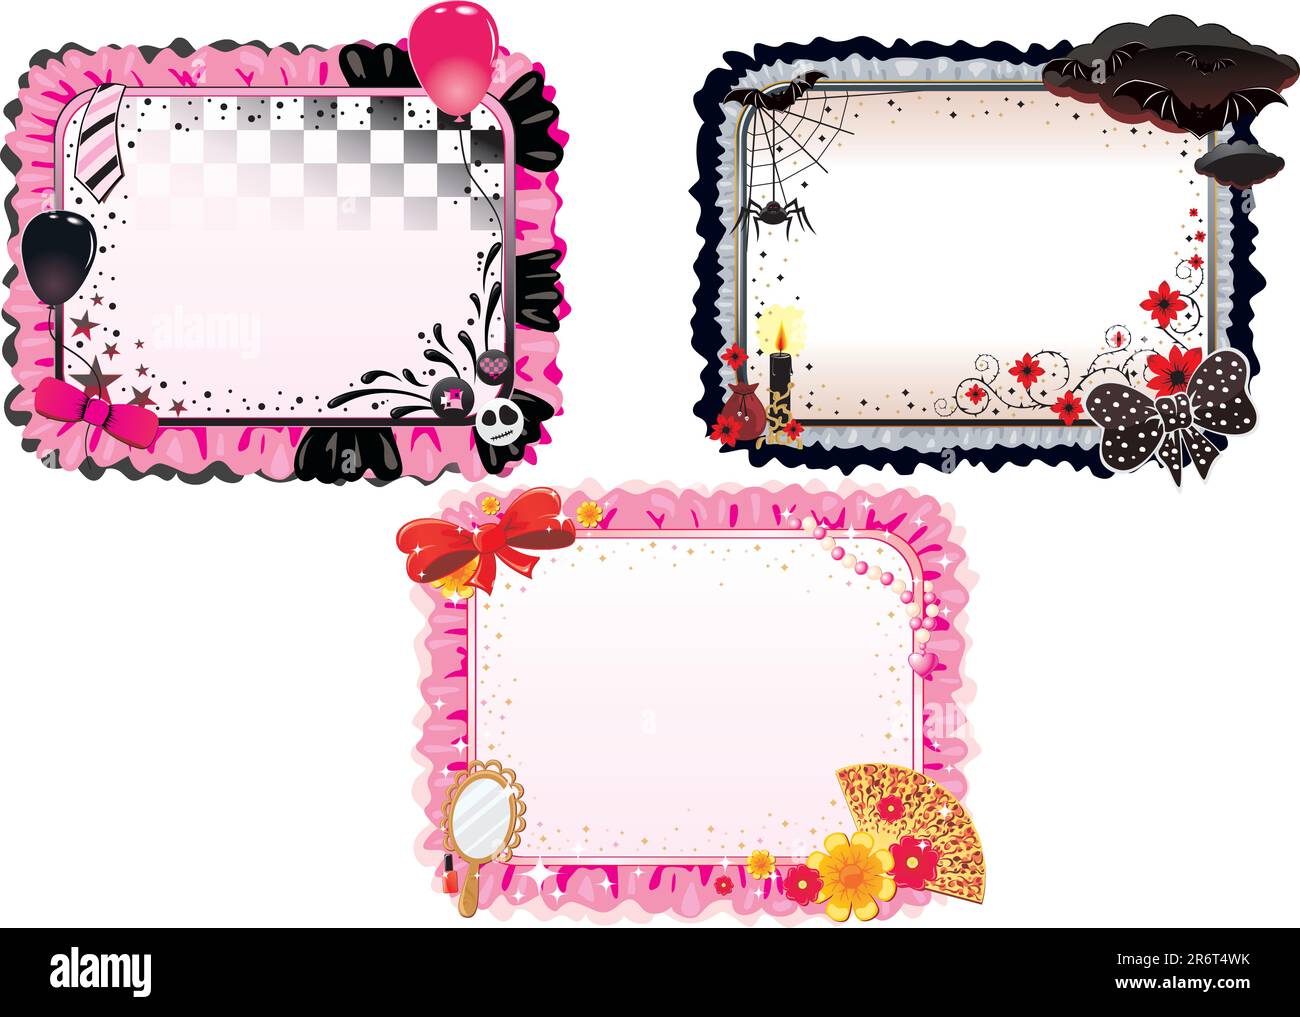 Pink for glam style, black for gothic and mixed for emo style. Stock Vector